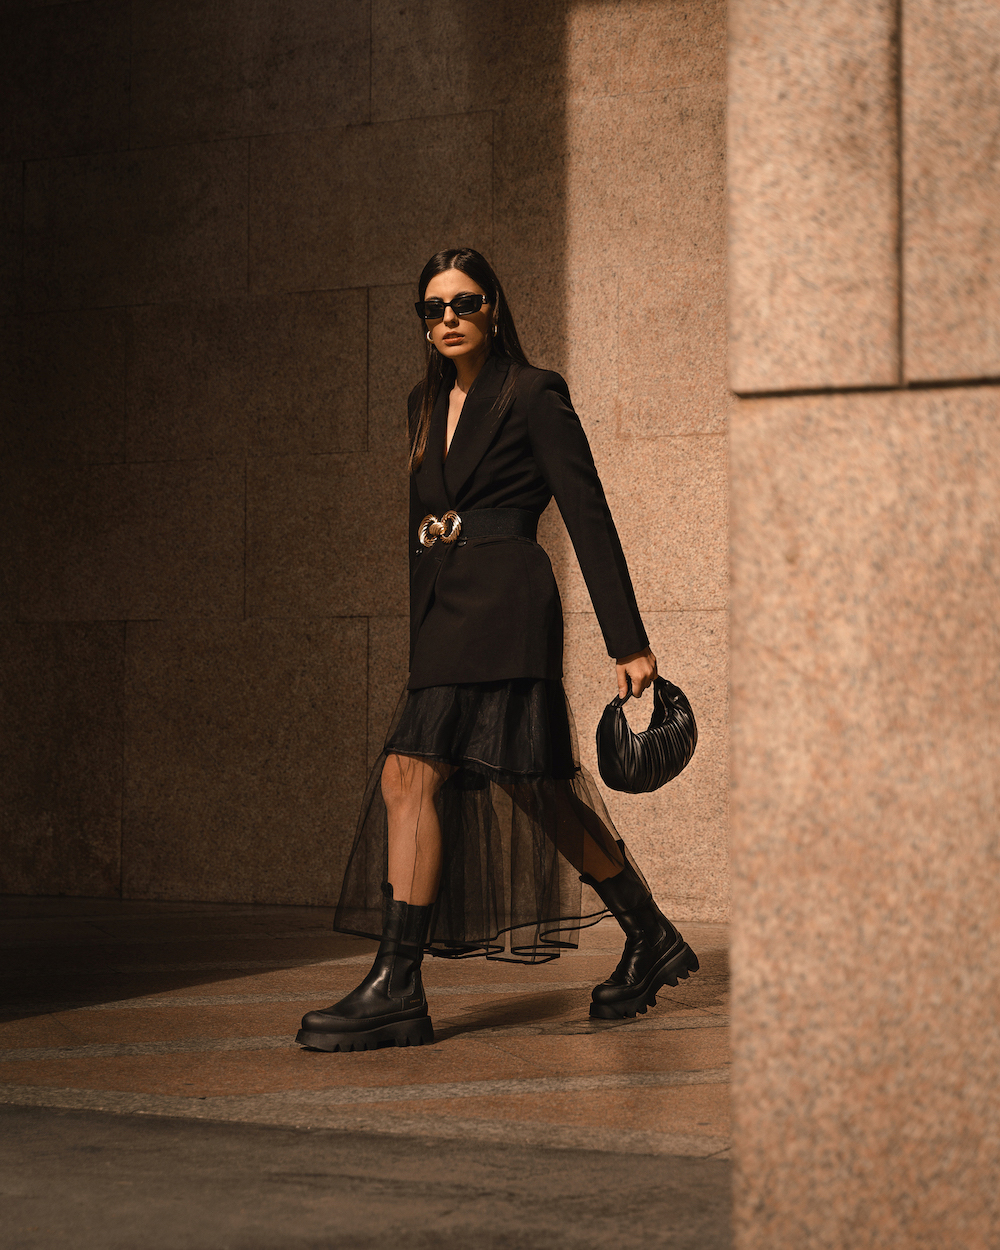 Vanessa Gentile styled her cPH780 Vitello Black with a black chiffon skirt and big sunglases.